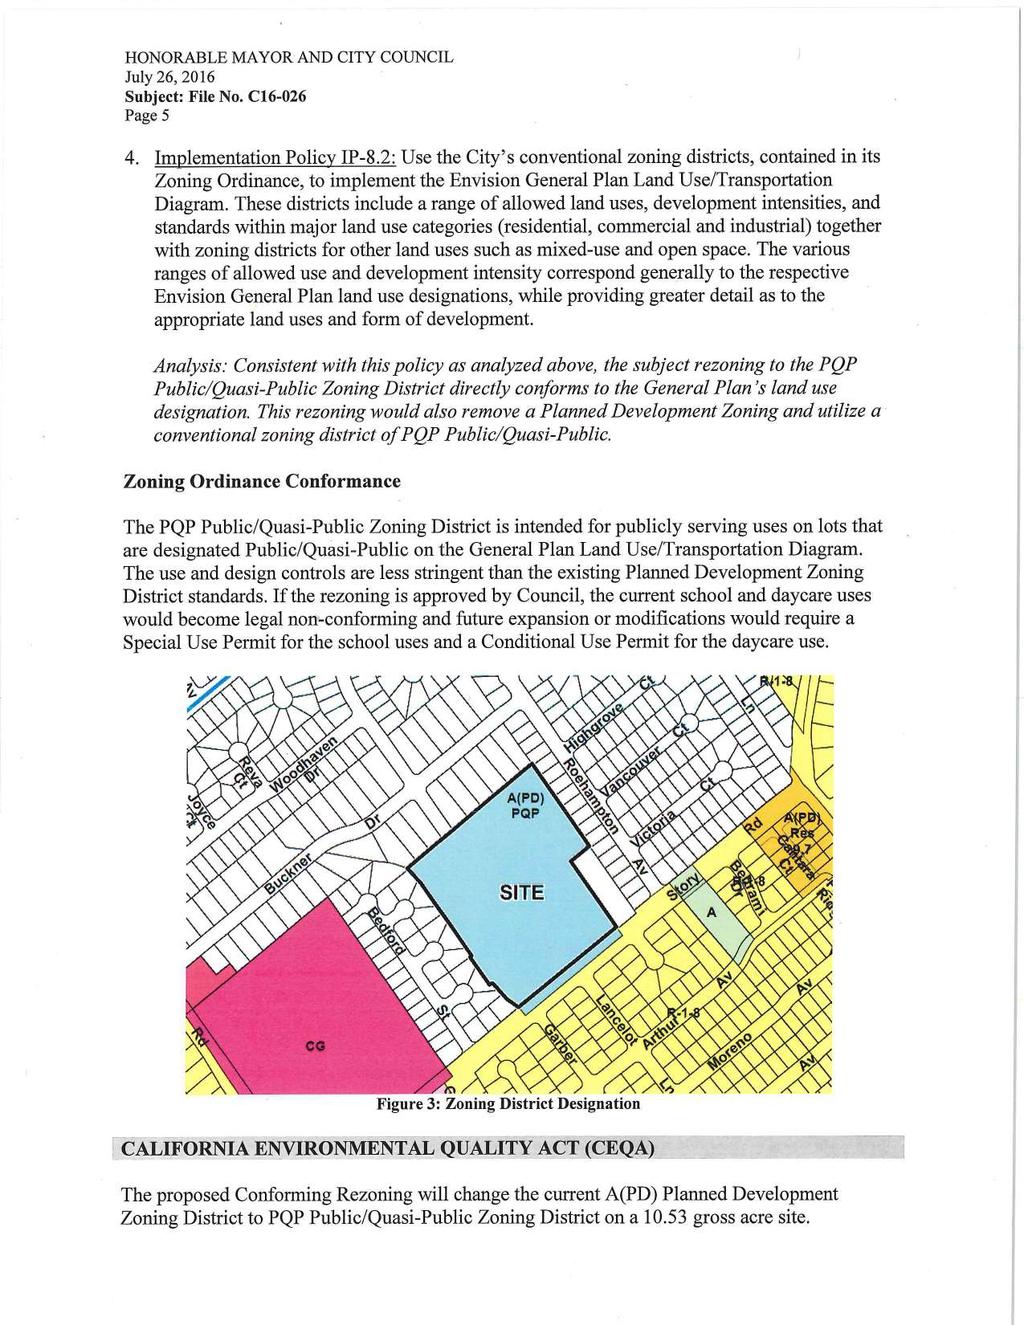 Page 5 4. Implementation Policy IP-8.2: Use the City's conventional zoning districts, contained in its Zoning Ordinance, to implement the Envision General Plan Land Use/Transportation Diagram.